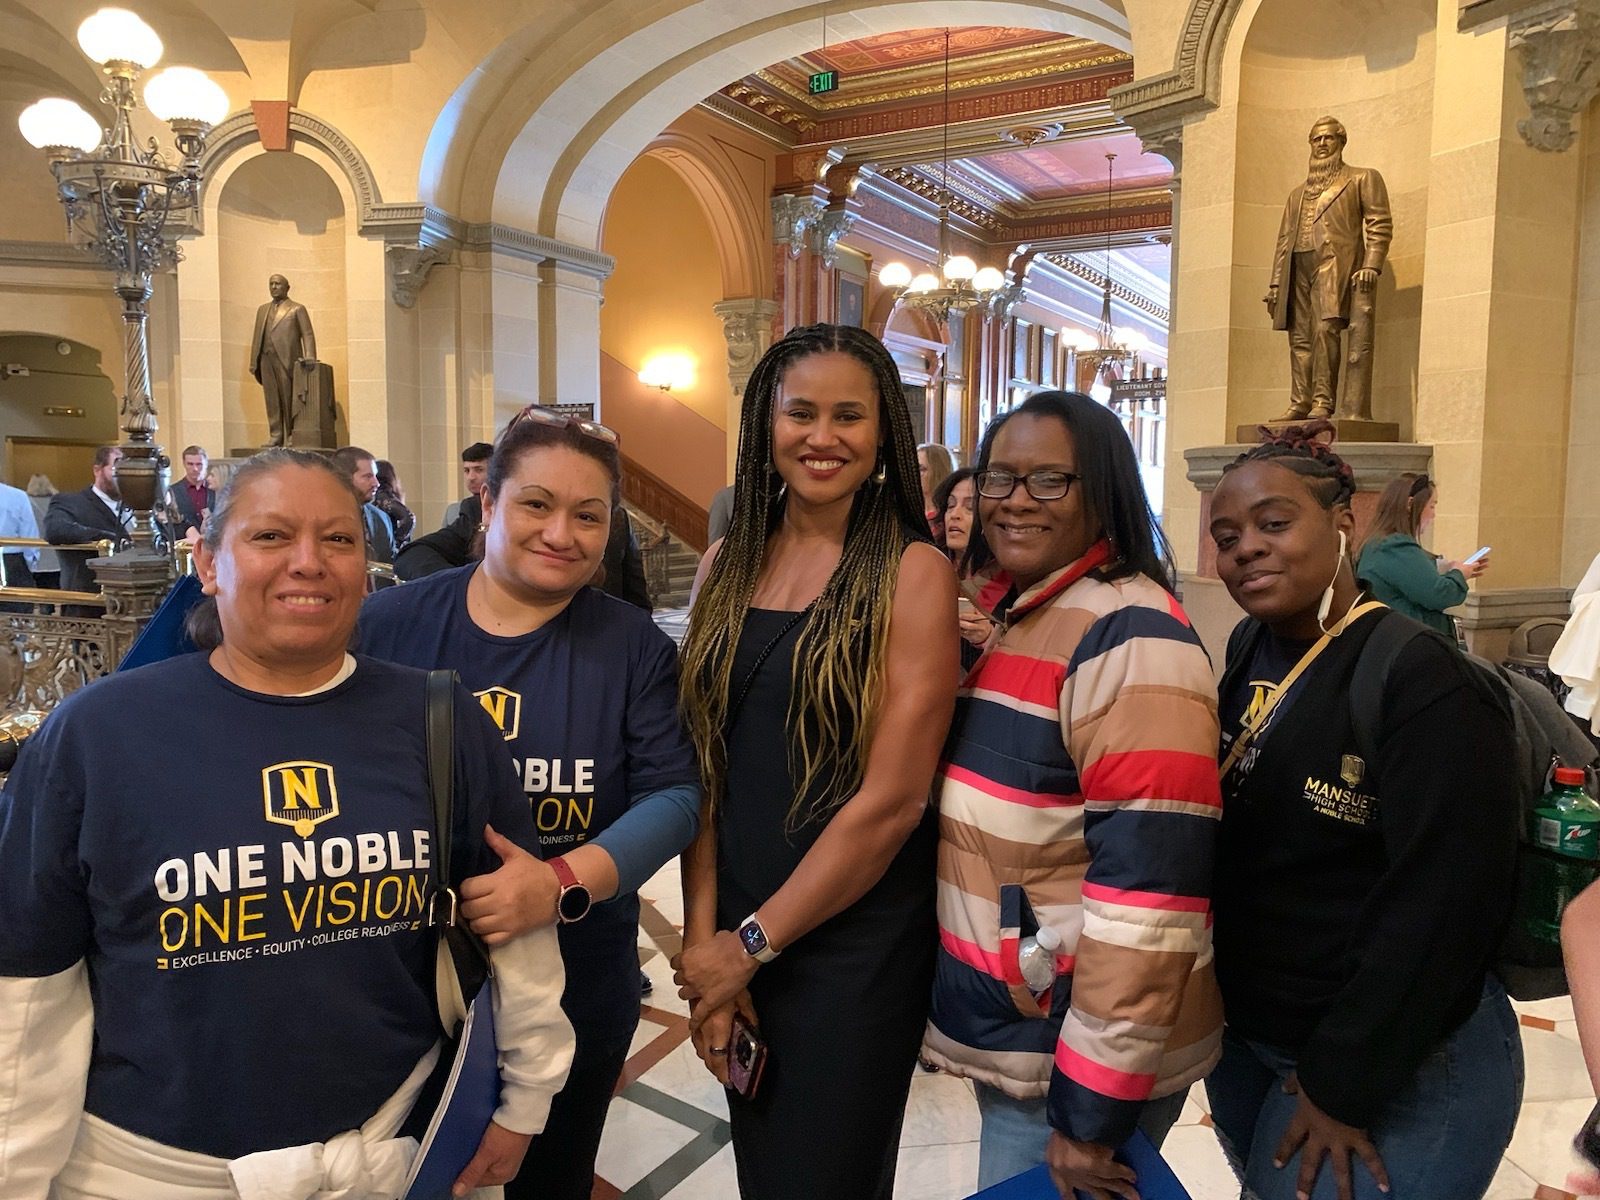 This photo shows Noble Schools' CEO Constance Jones with Noble parents in the State Capitol building in Springfield.